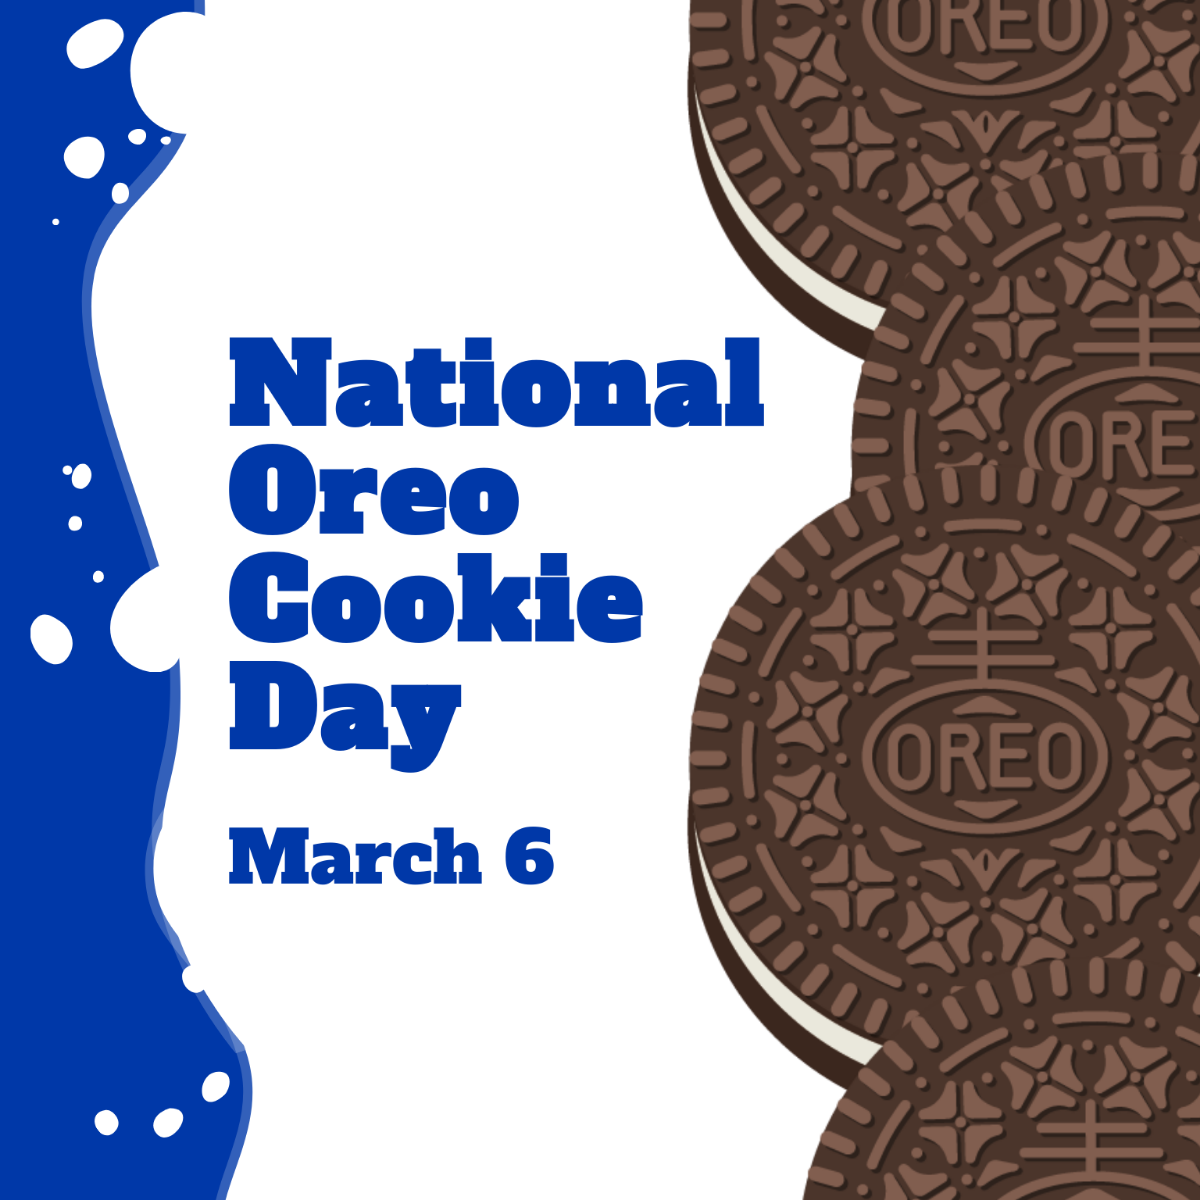 Free National Oreo Cookie Day Flyer Vector Template